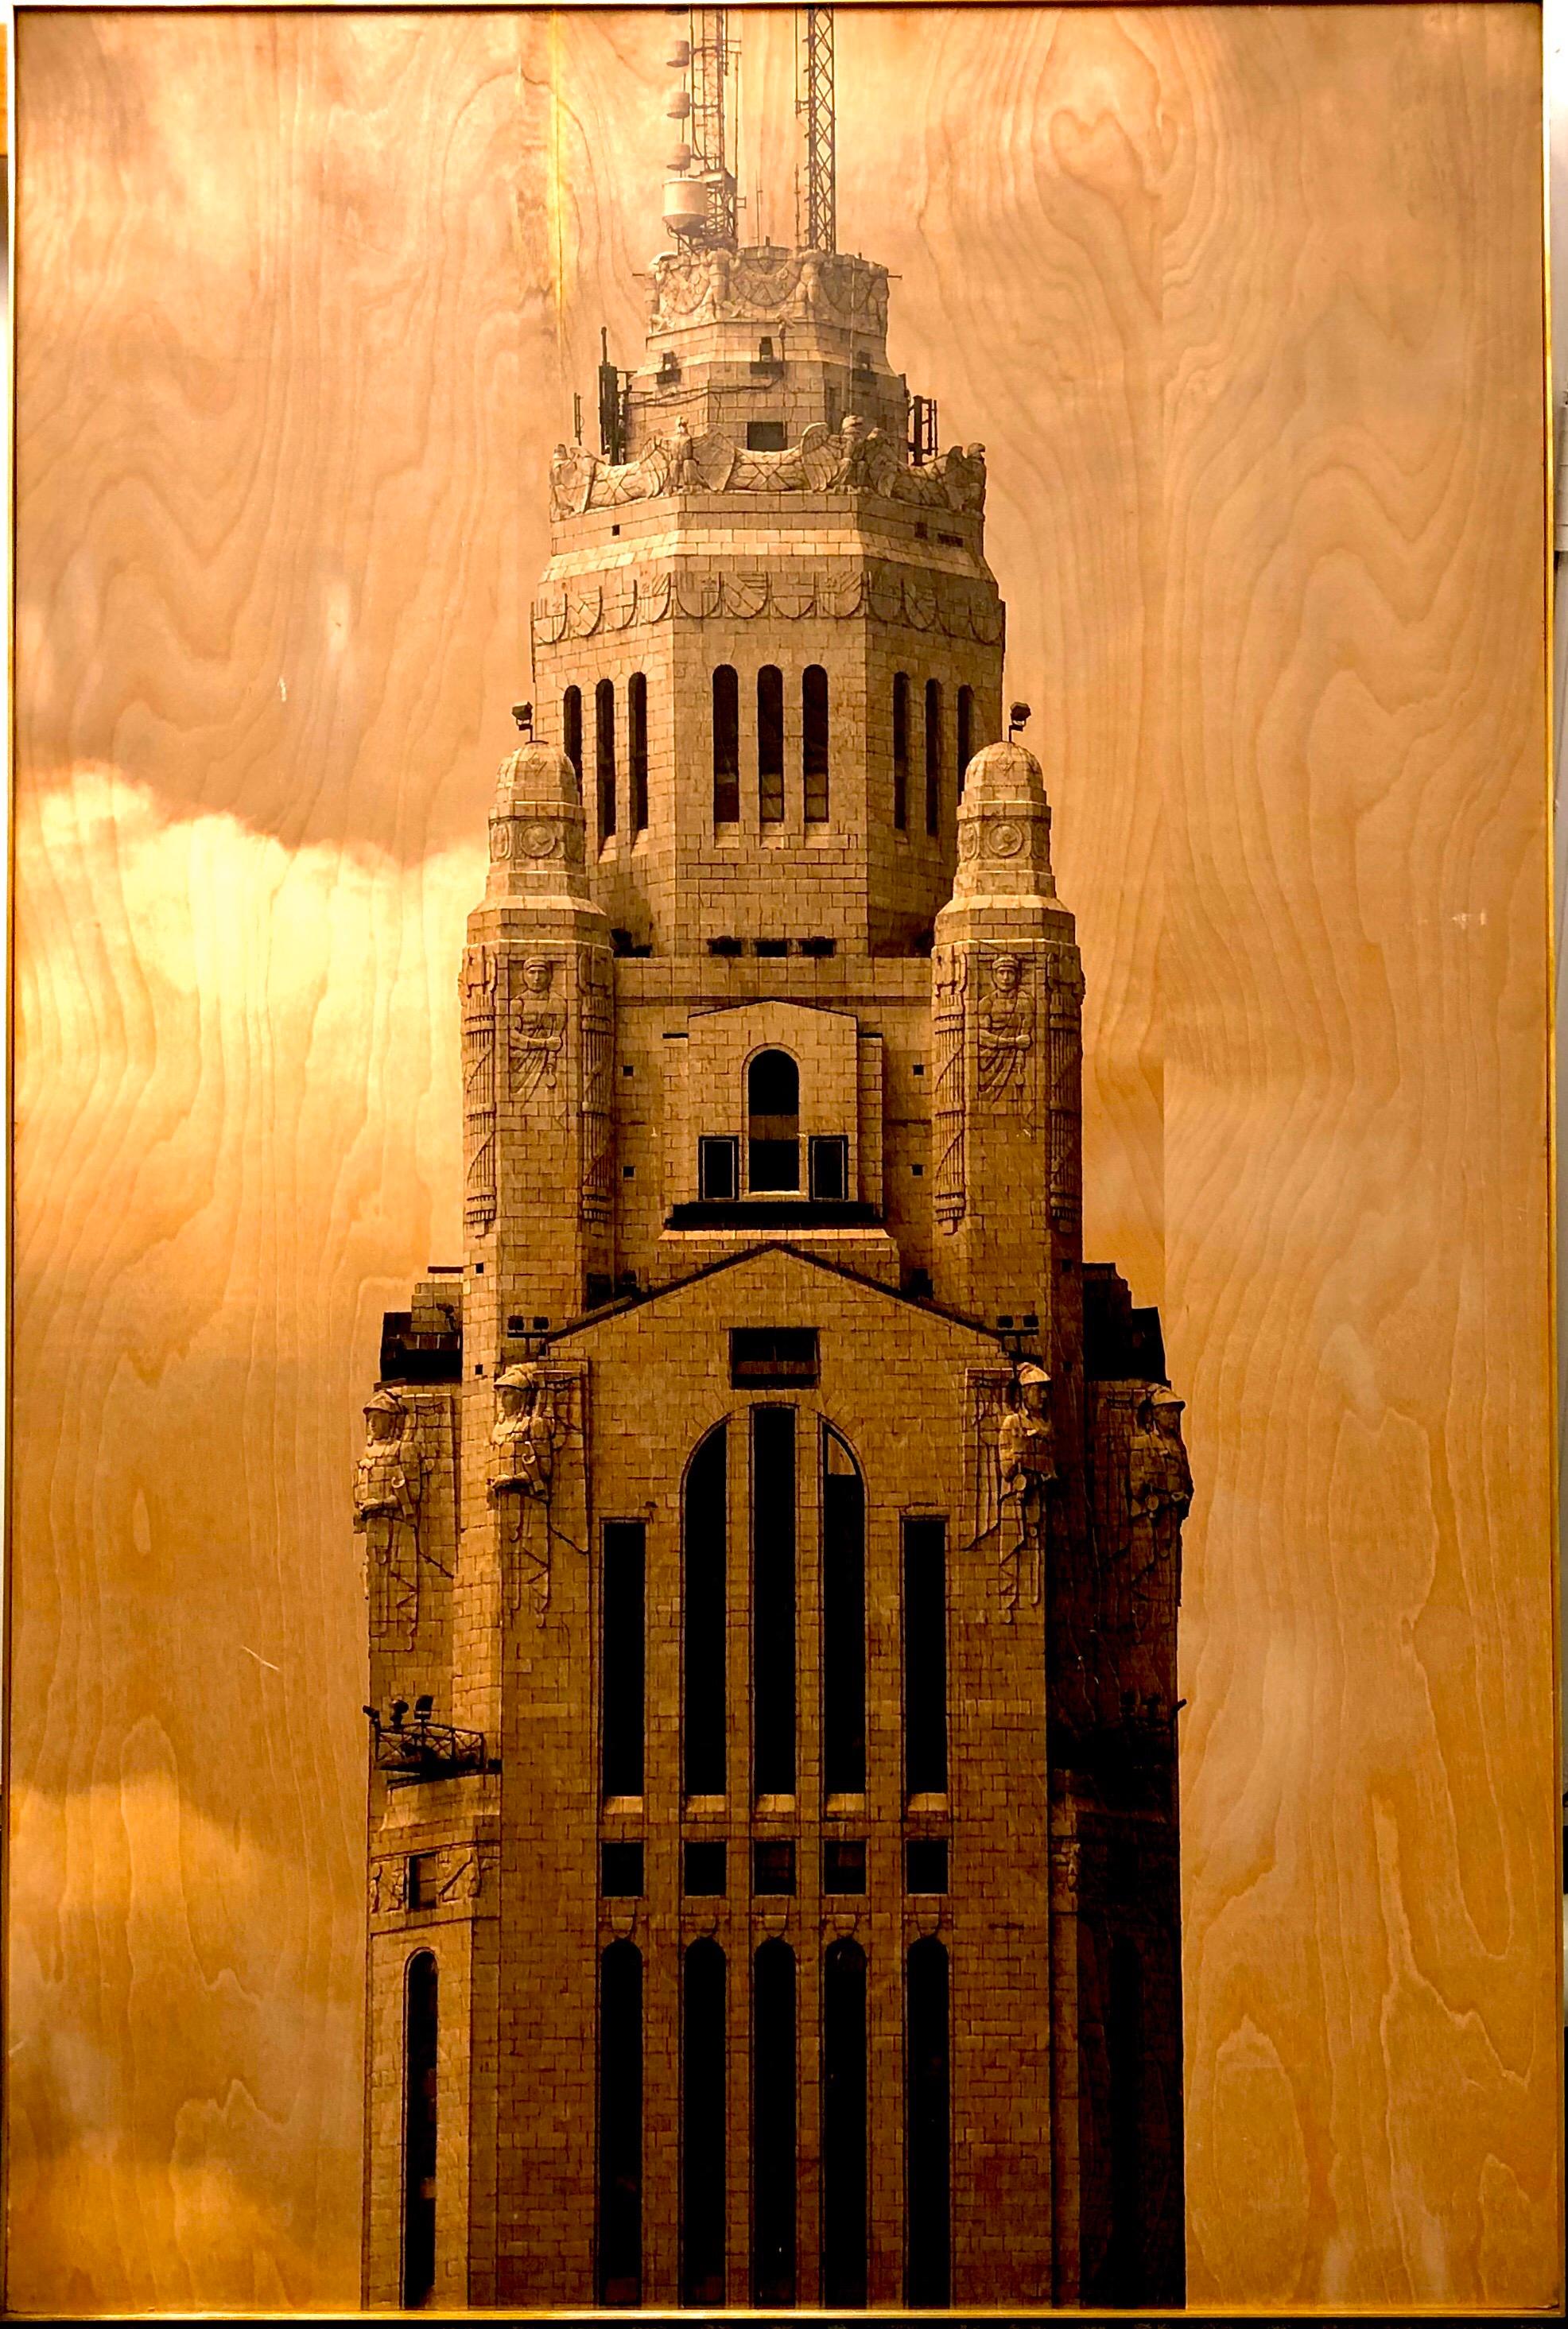 This brass trimmed framed photo print with details of wood grain and wonderful black print with excellent clarity. A wonderful piece of wall art.

The LeVeque Tower is a 47-story skyscraper located at 50 West Broad Street in Columbus, Ohio, built